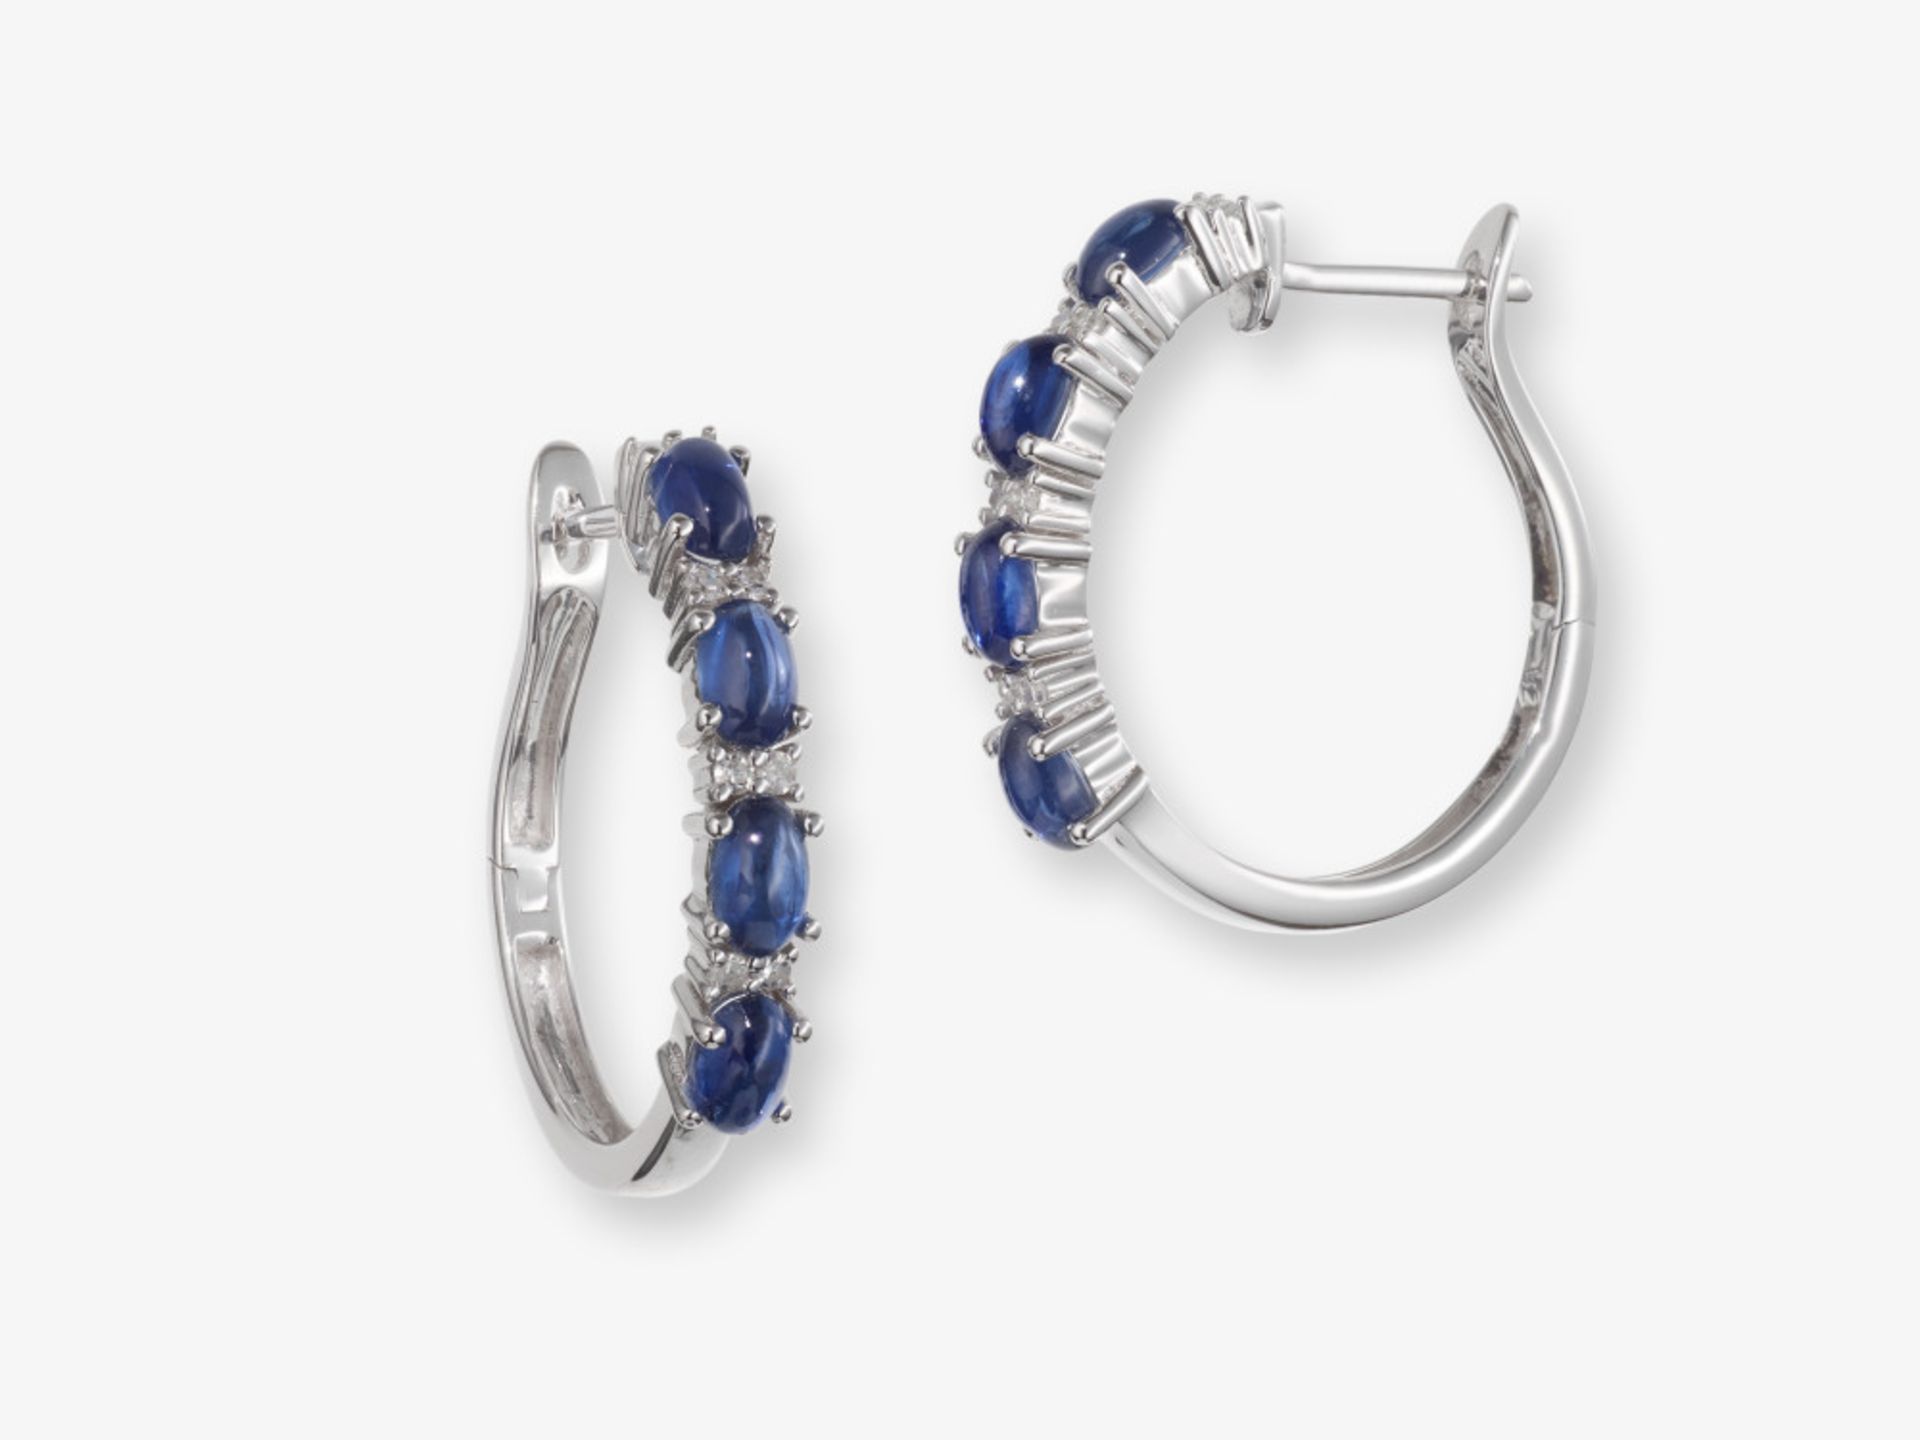 A pair of classic hoop earrings decorated with sapphires and brilliant-cut diamonds - Image 2 of 2